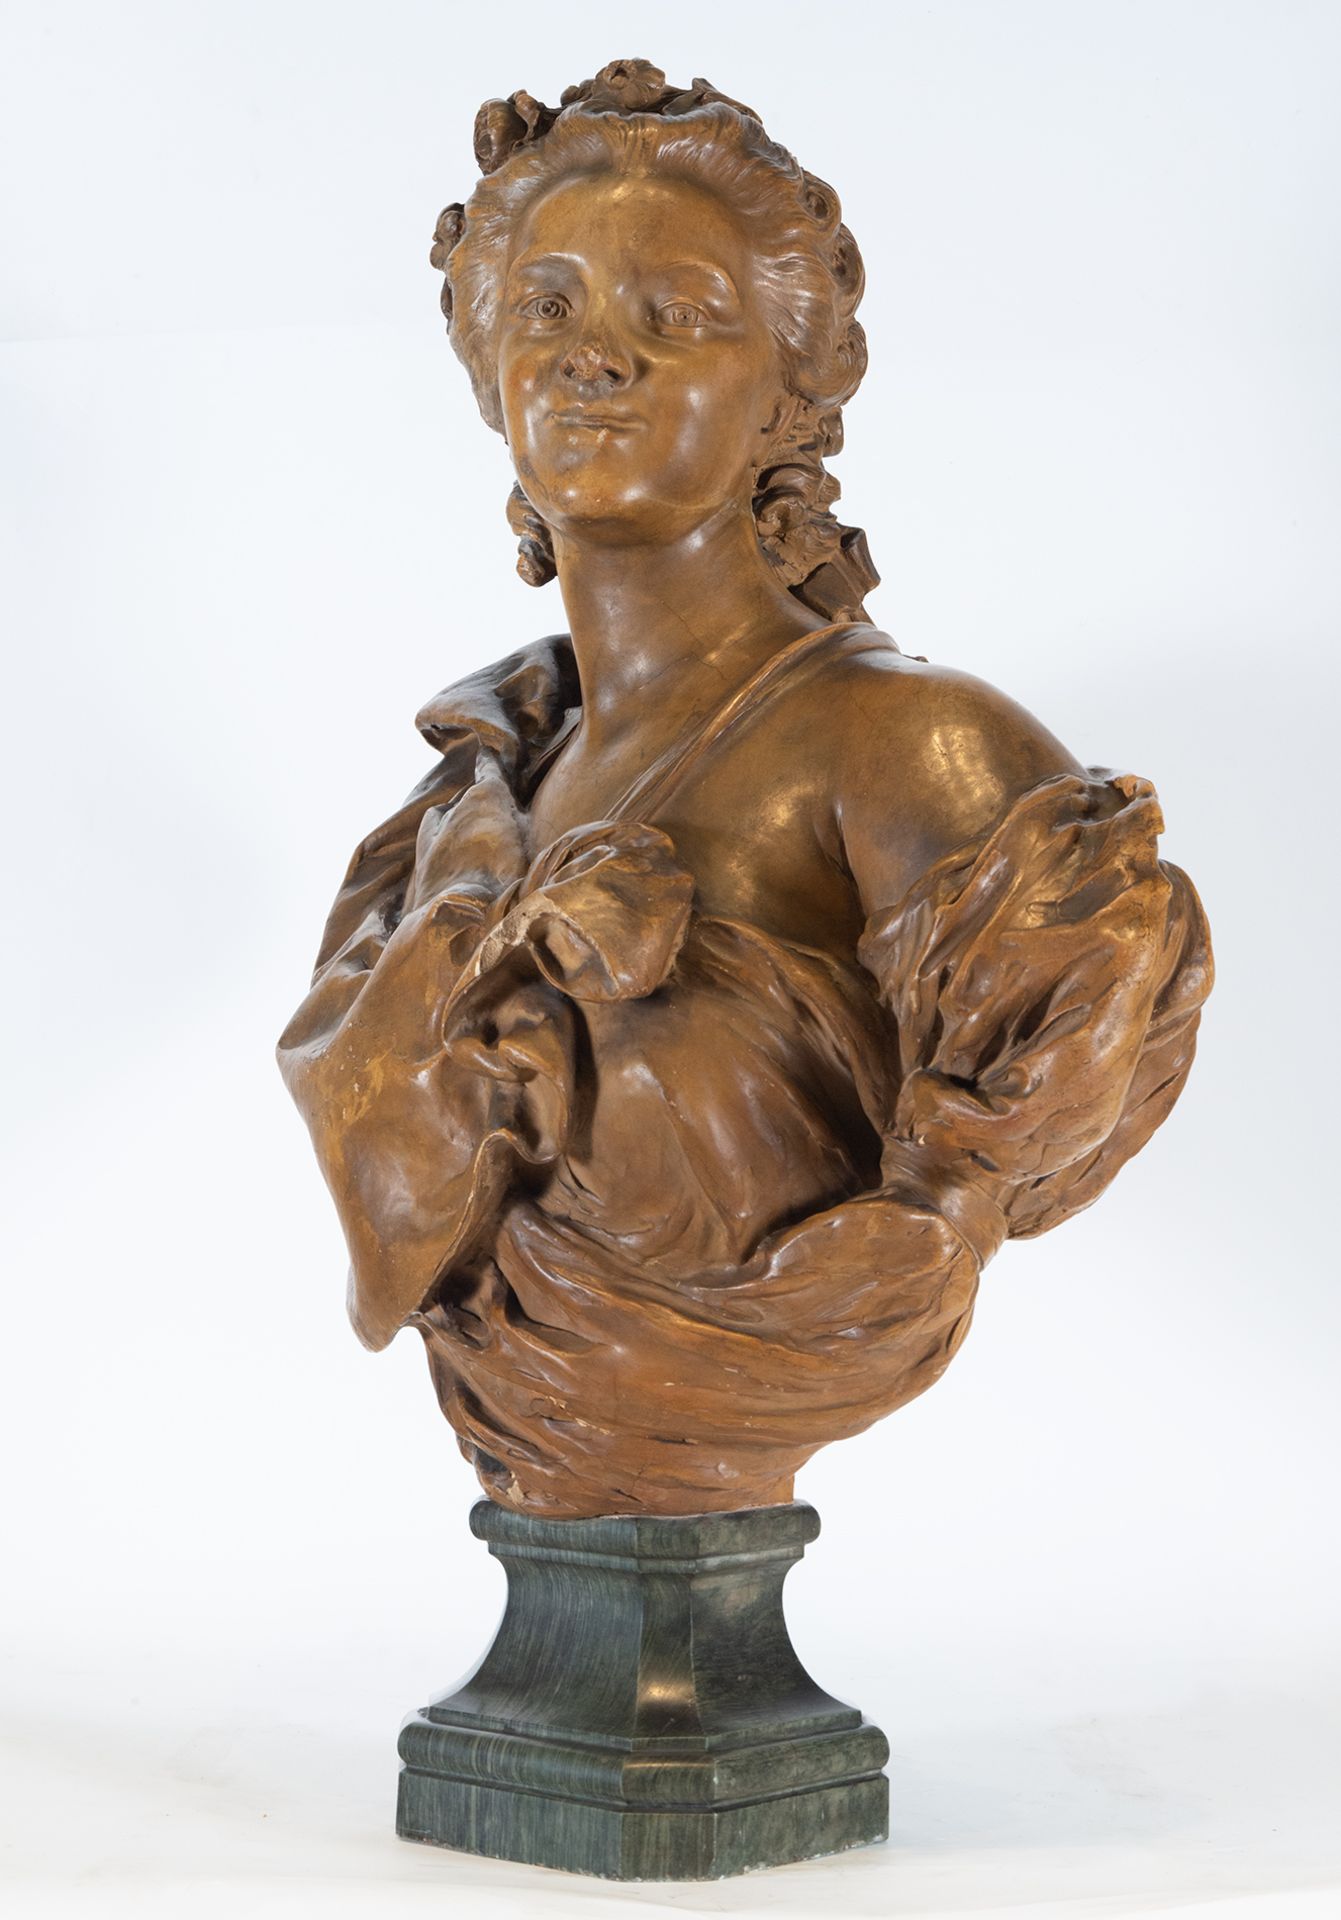 Large Bust of French Noble Lady in Terracotta, France, 18th century - Image 2 of 6